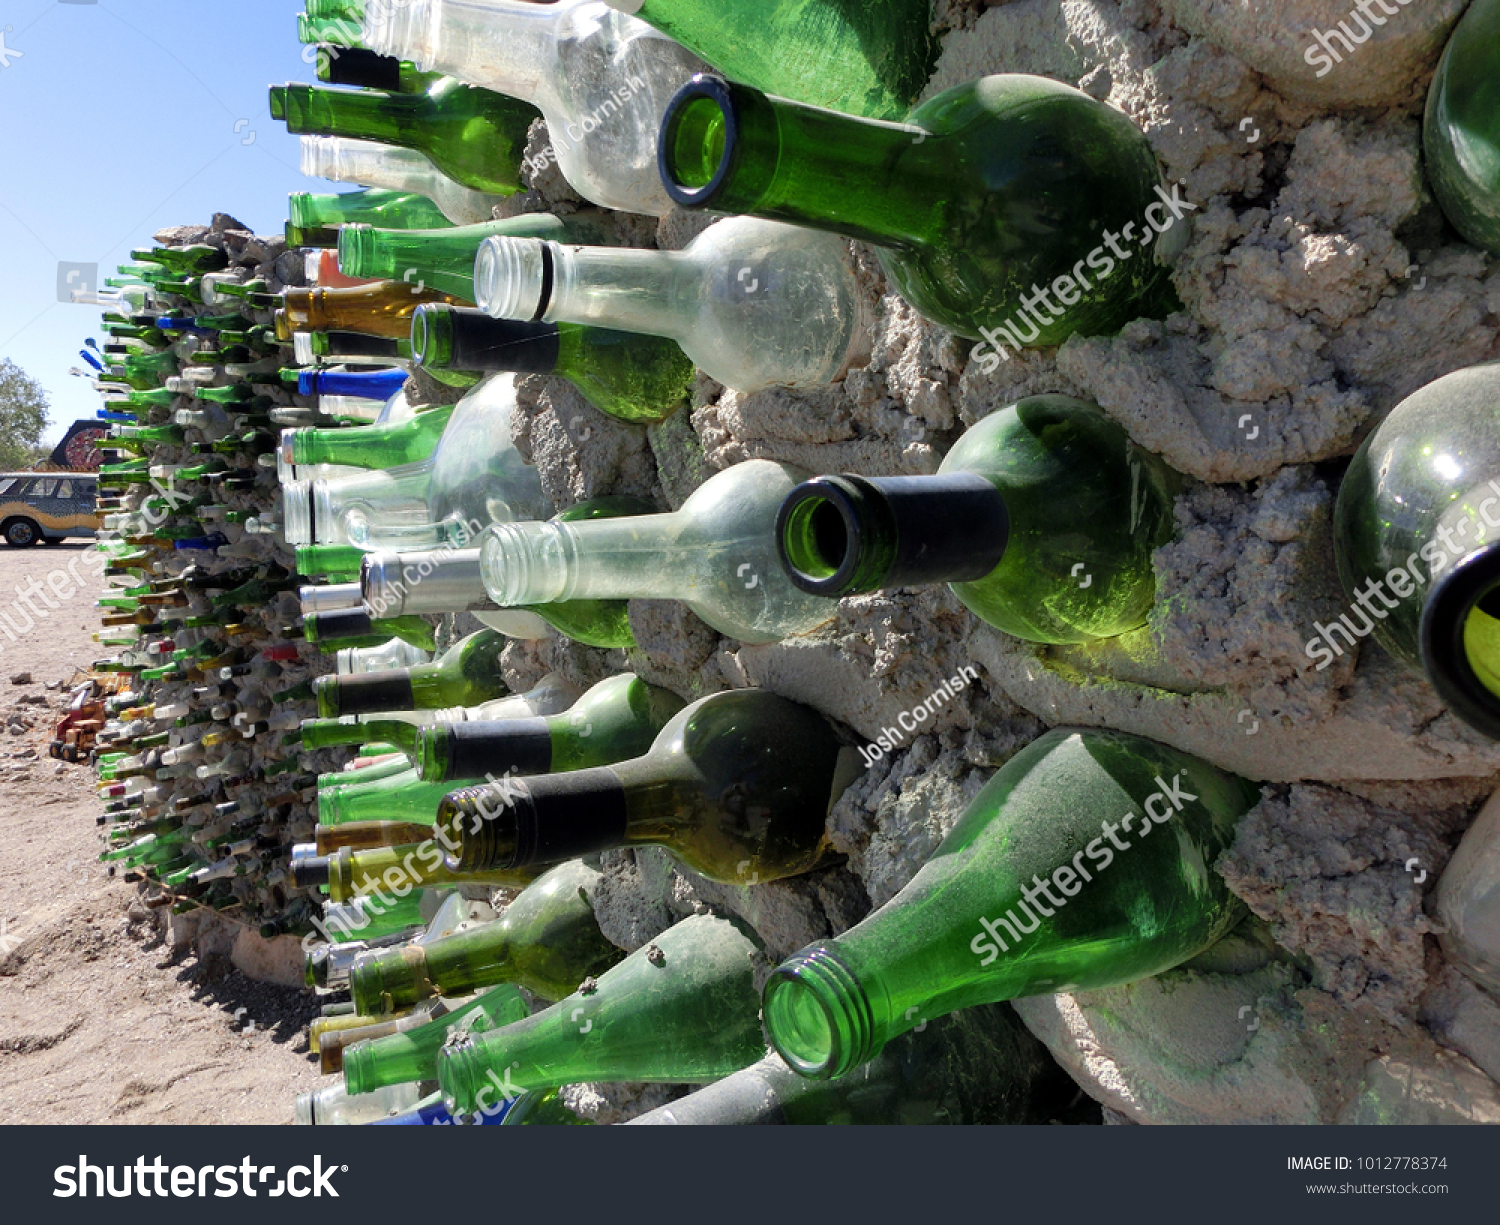 Download Bottle Wall Vintage Green Glass Beer Stock Photo Edit Now 1012778374 PSD Mockup Templates